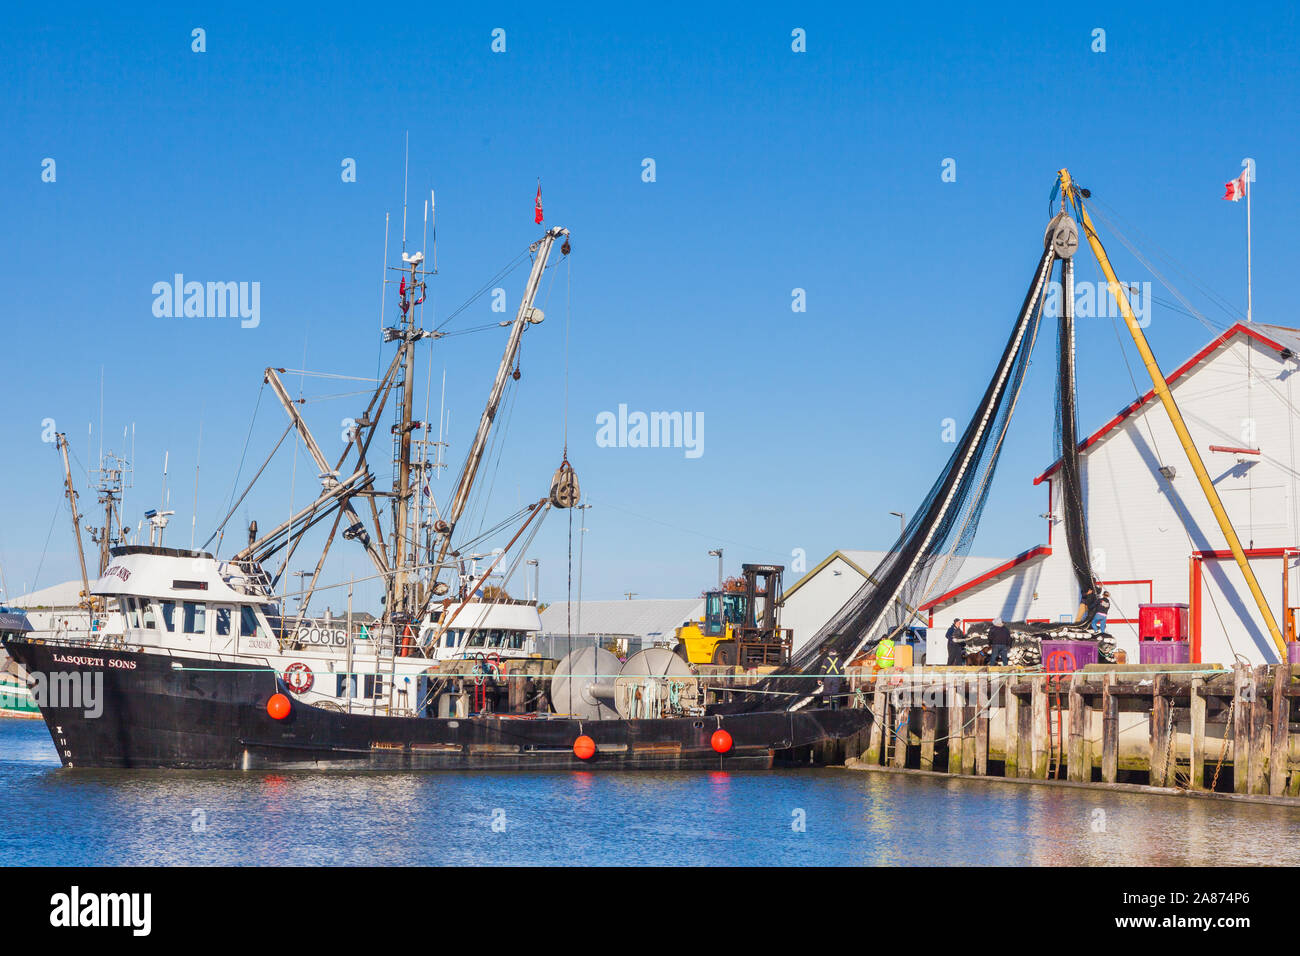 https://c8.alamy.com/comp/2A874P6/removing-a-seine-net-from-a-commercial-fishing-vessel-for-storage-at-a-dock-in-steveston-british-columbia-2A874P6.jpg